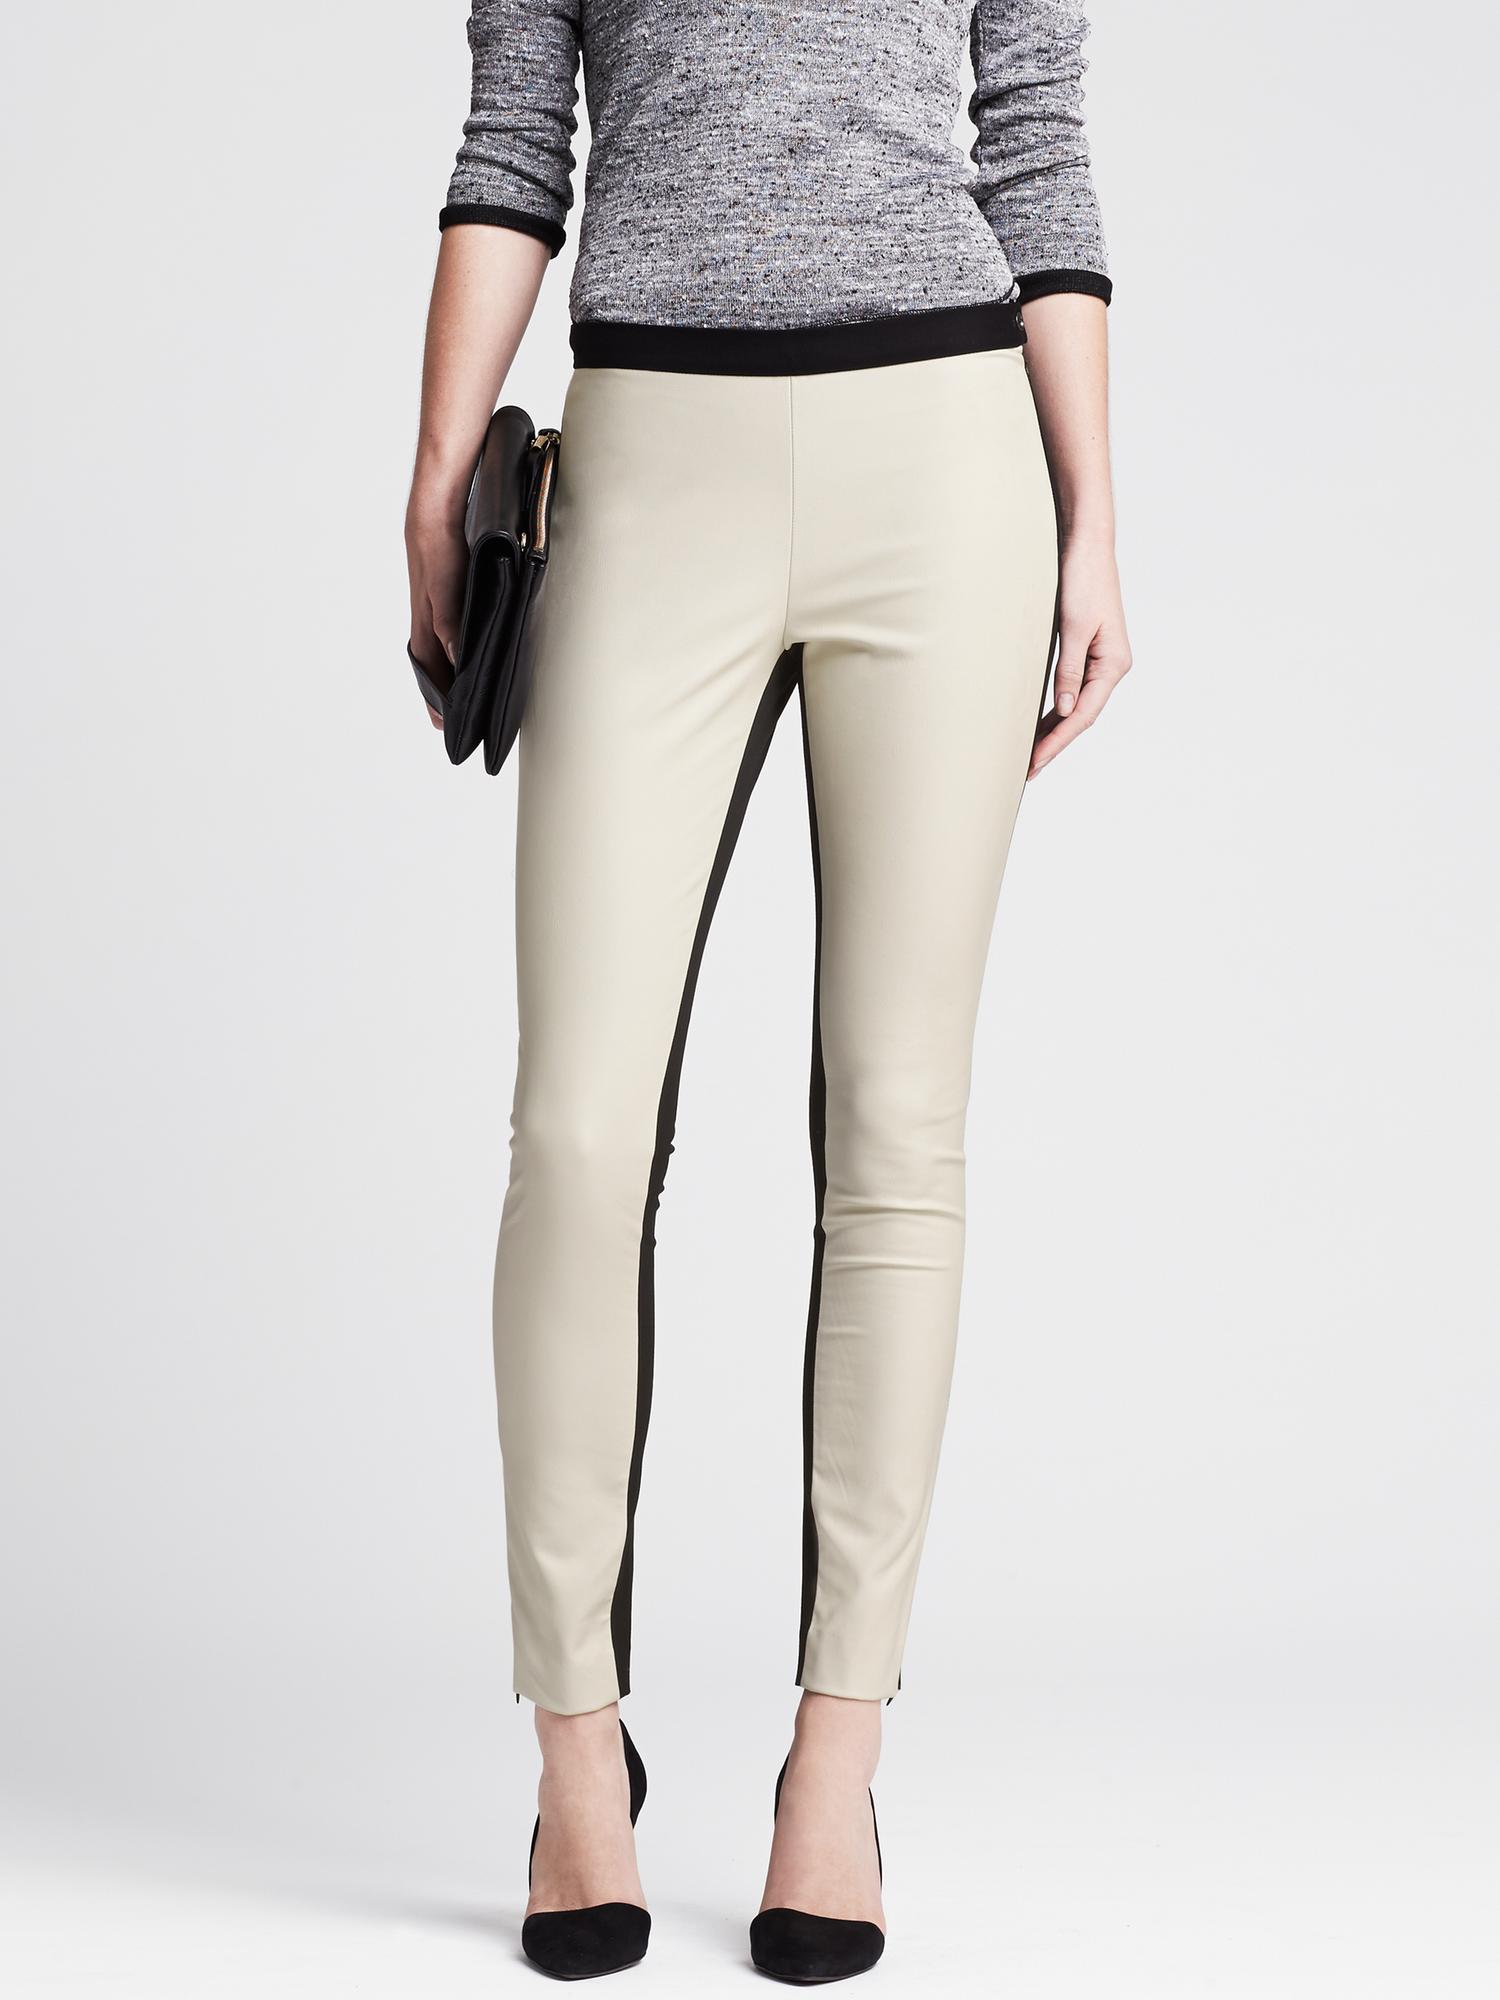 Sloan-Fit White Faux-Leather Front Legging